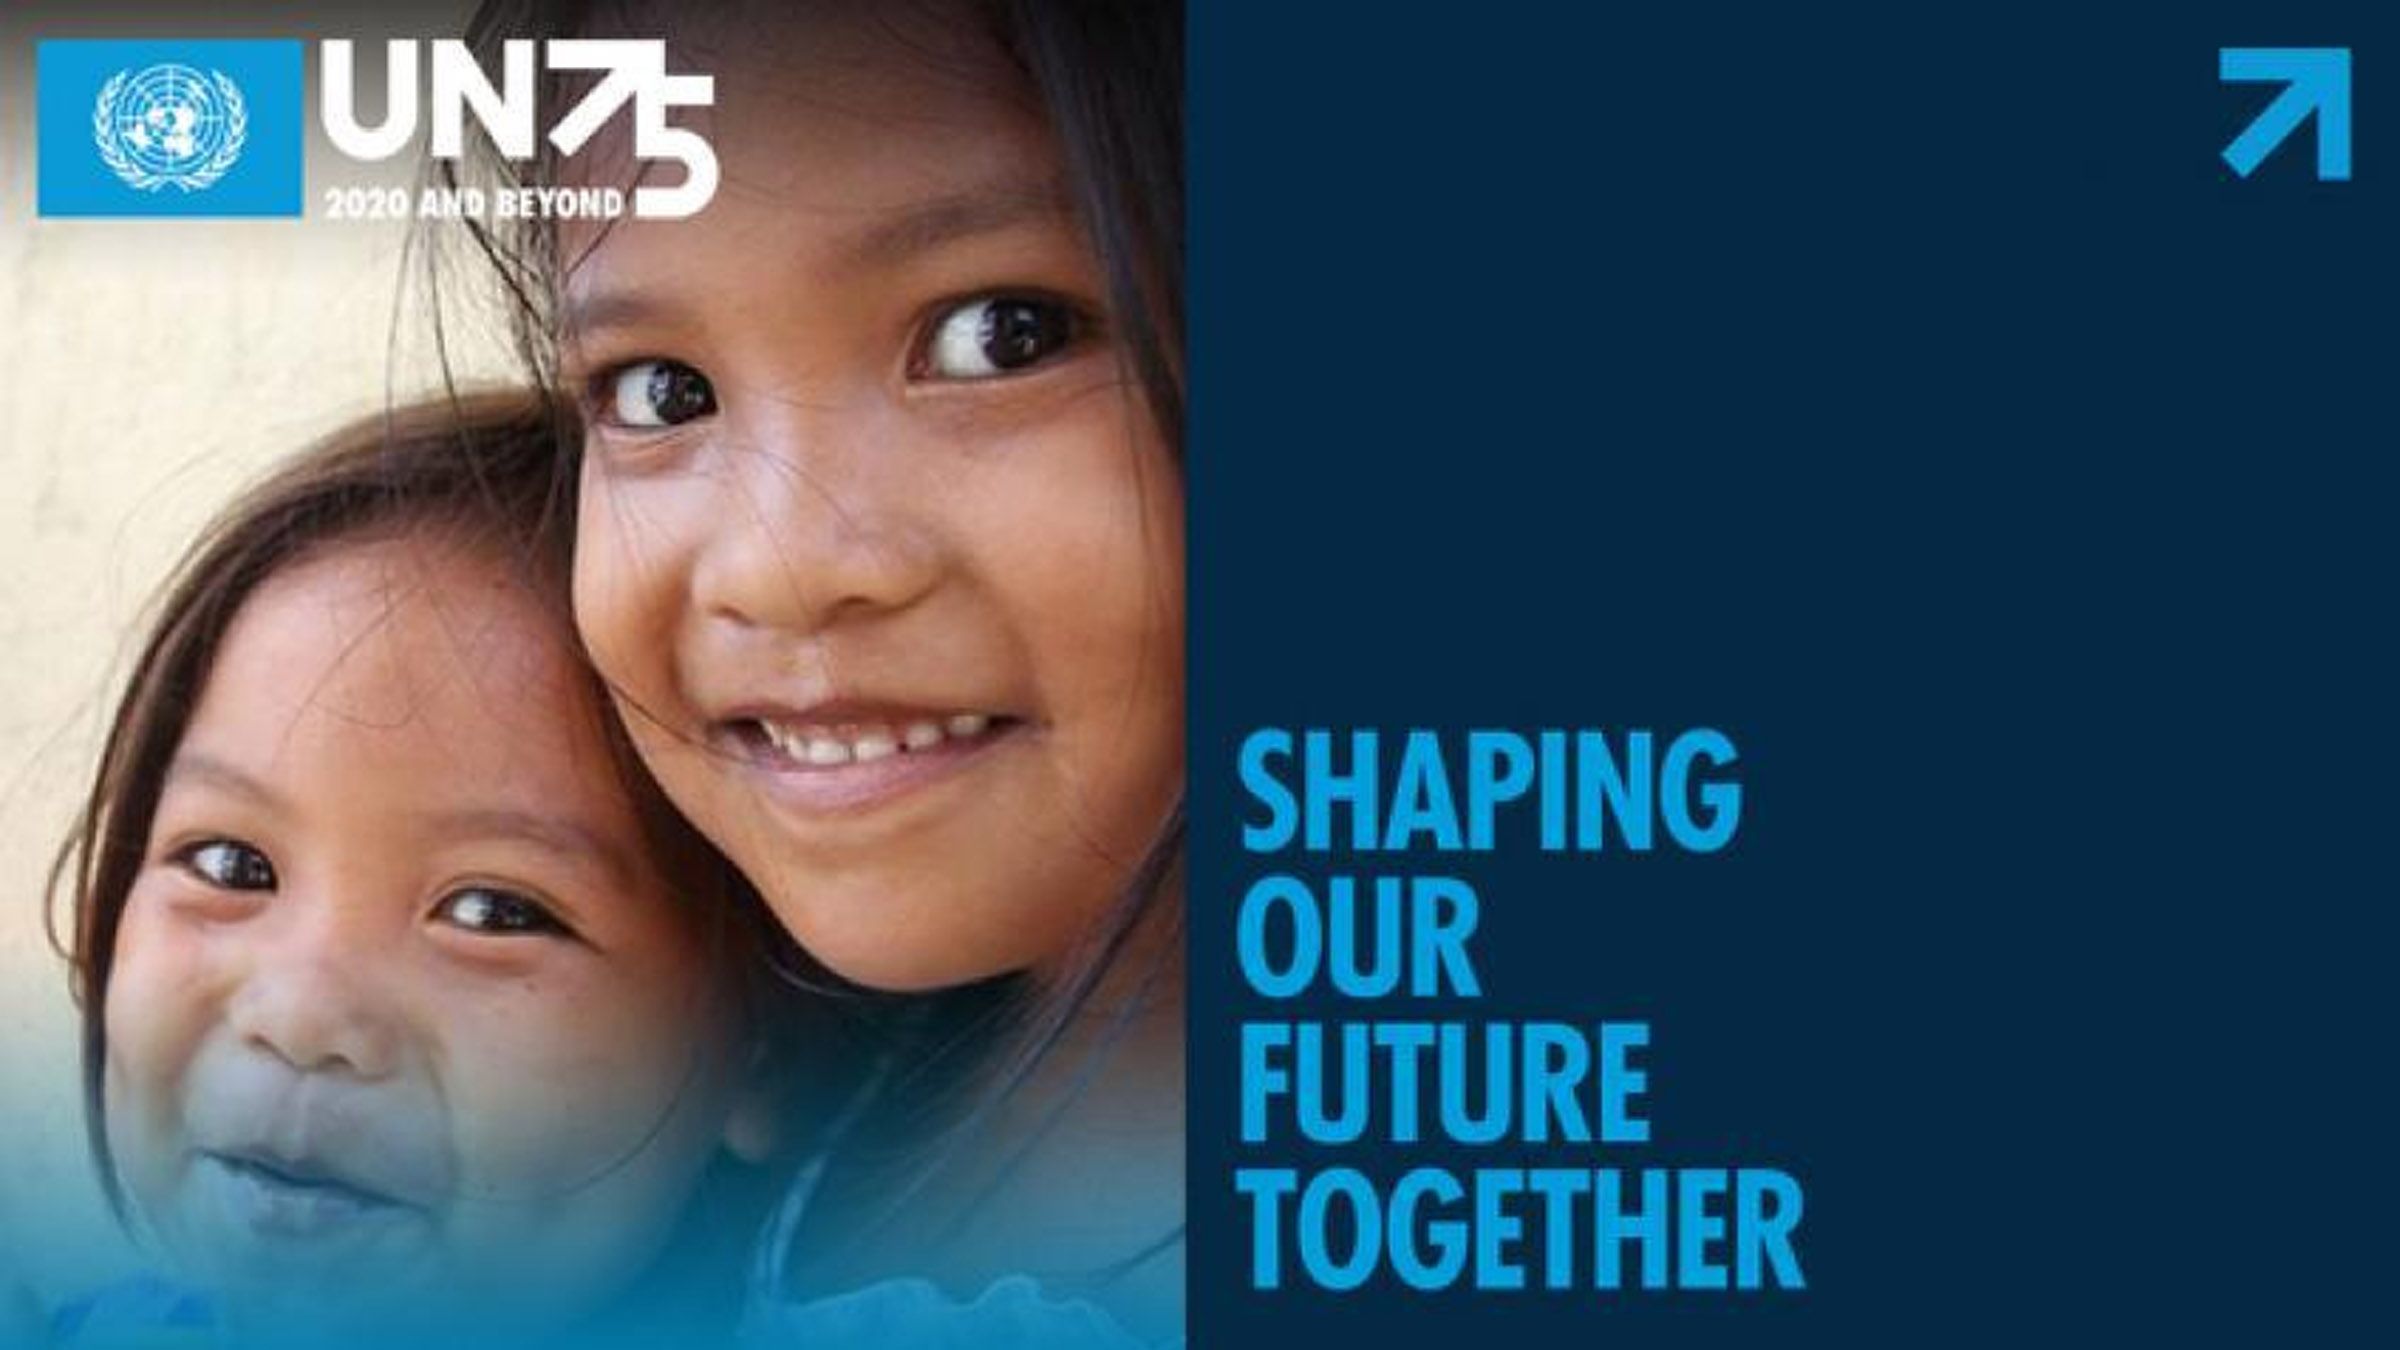 Shaping our future together